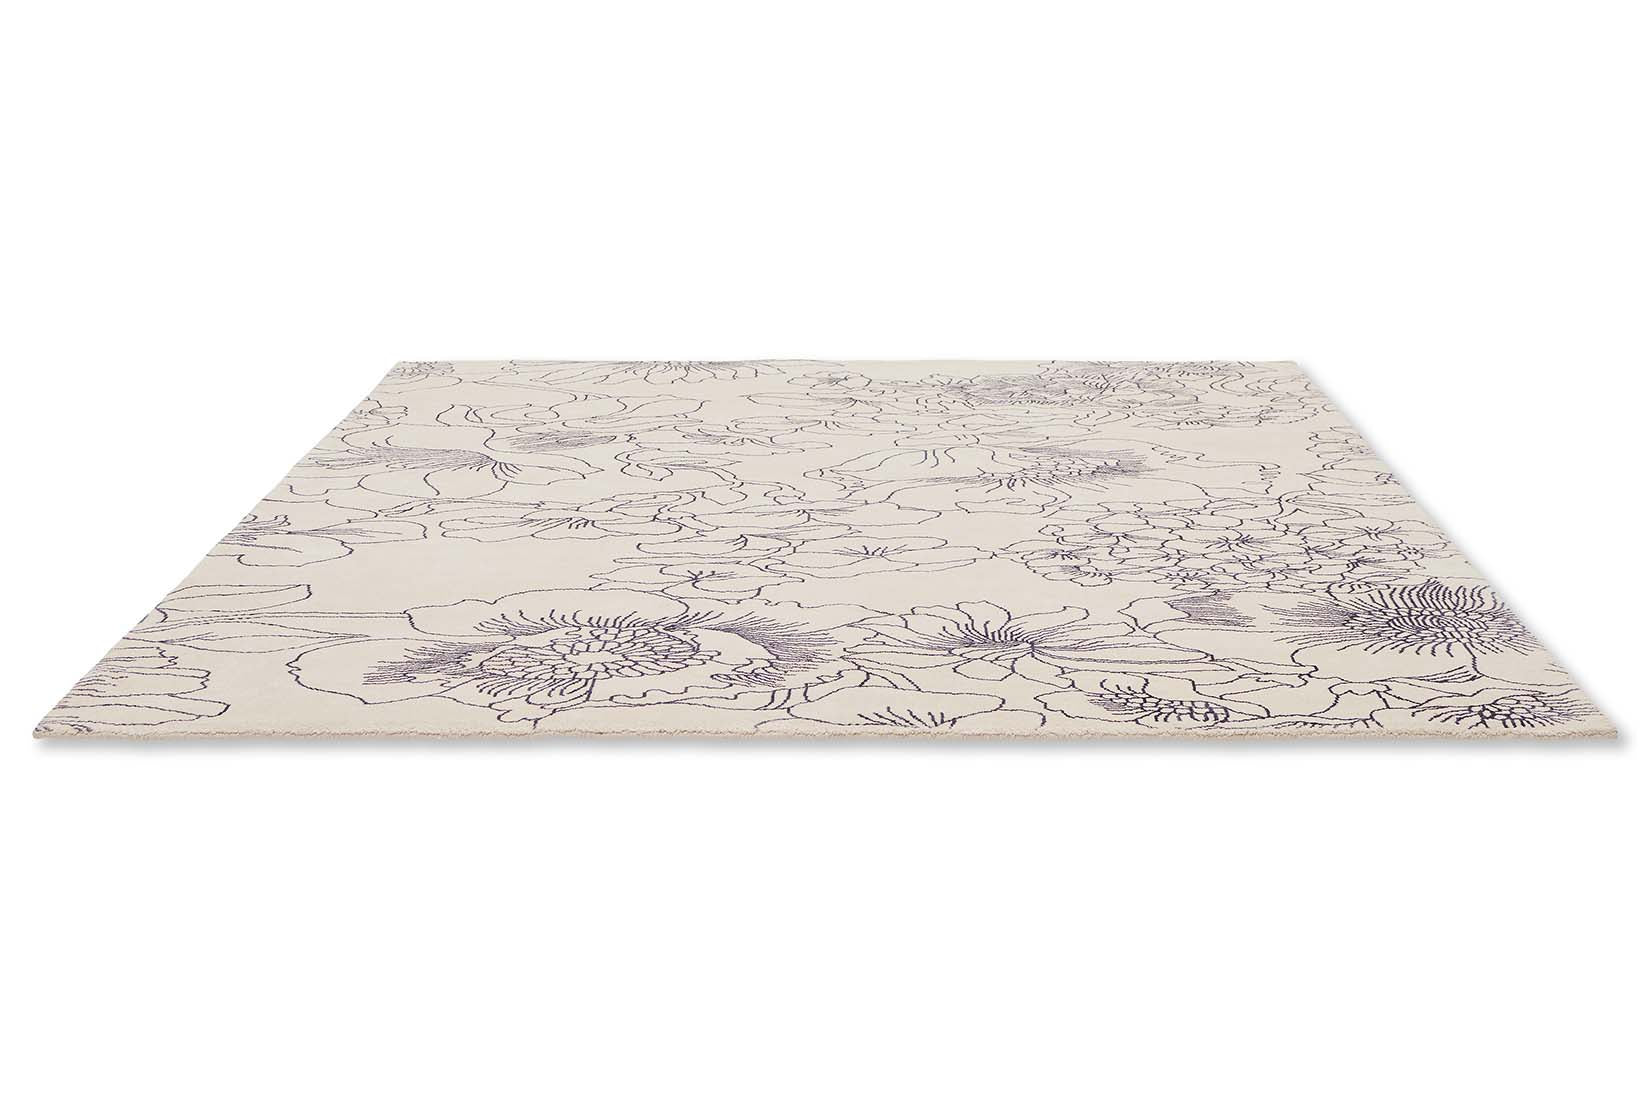 cream cotton rug with floral pattern in blue
